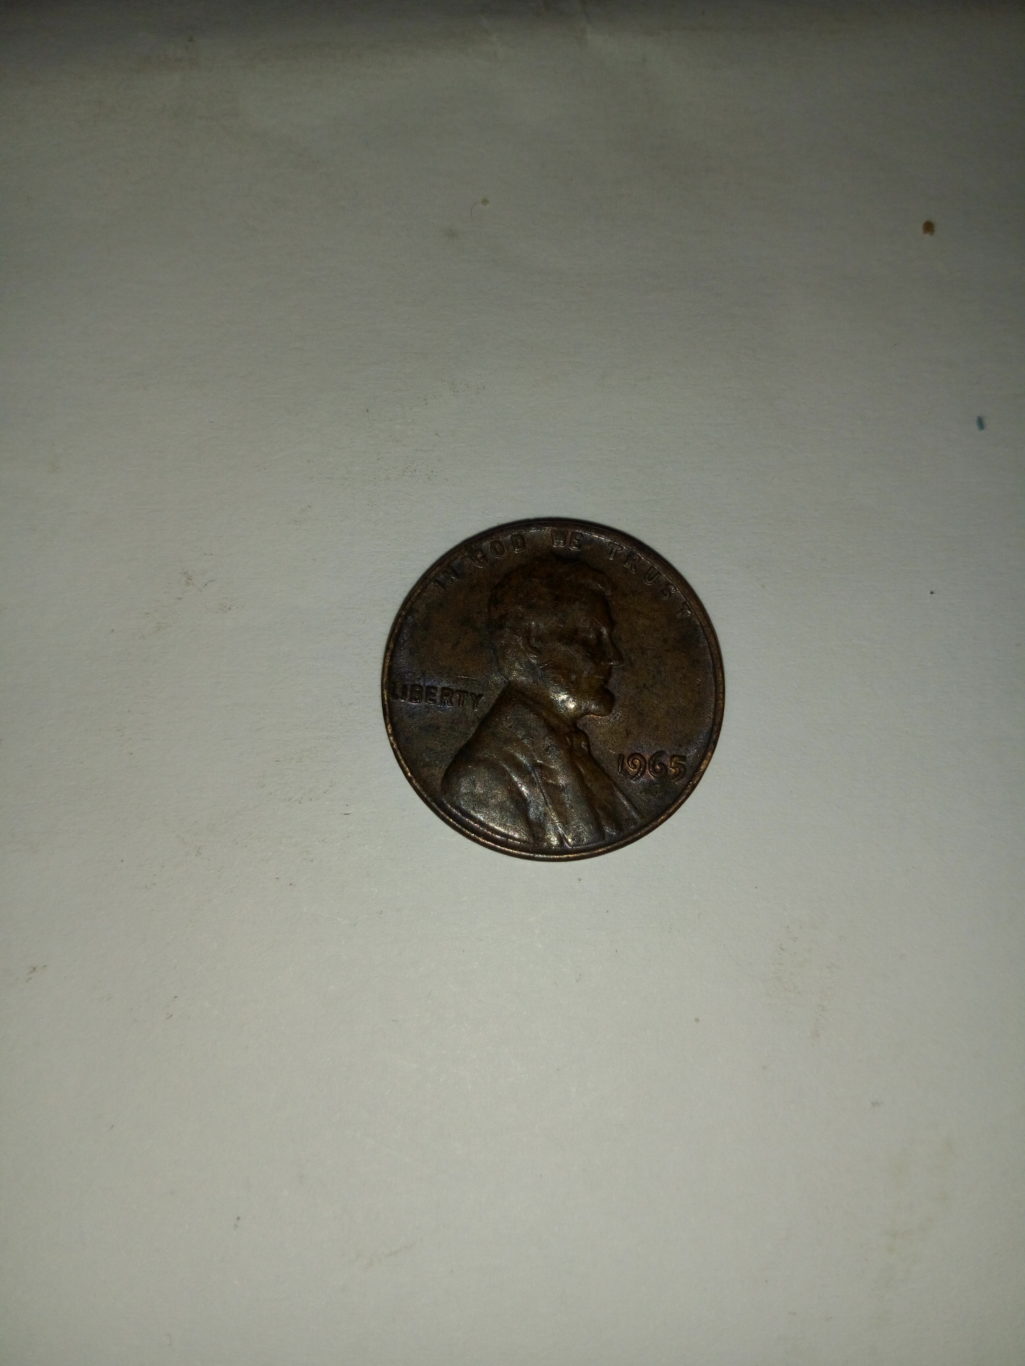 1965_ united states of America 1 cent